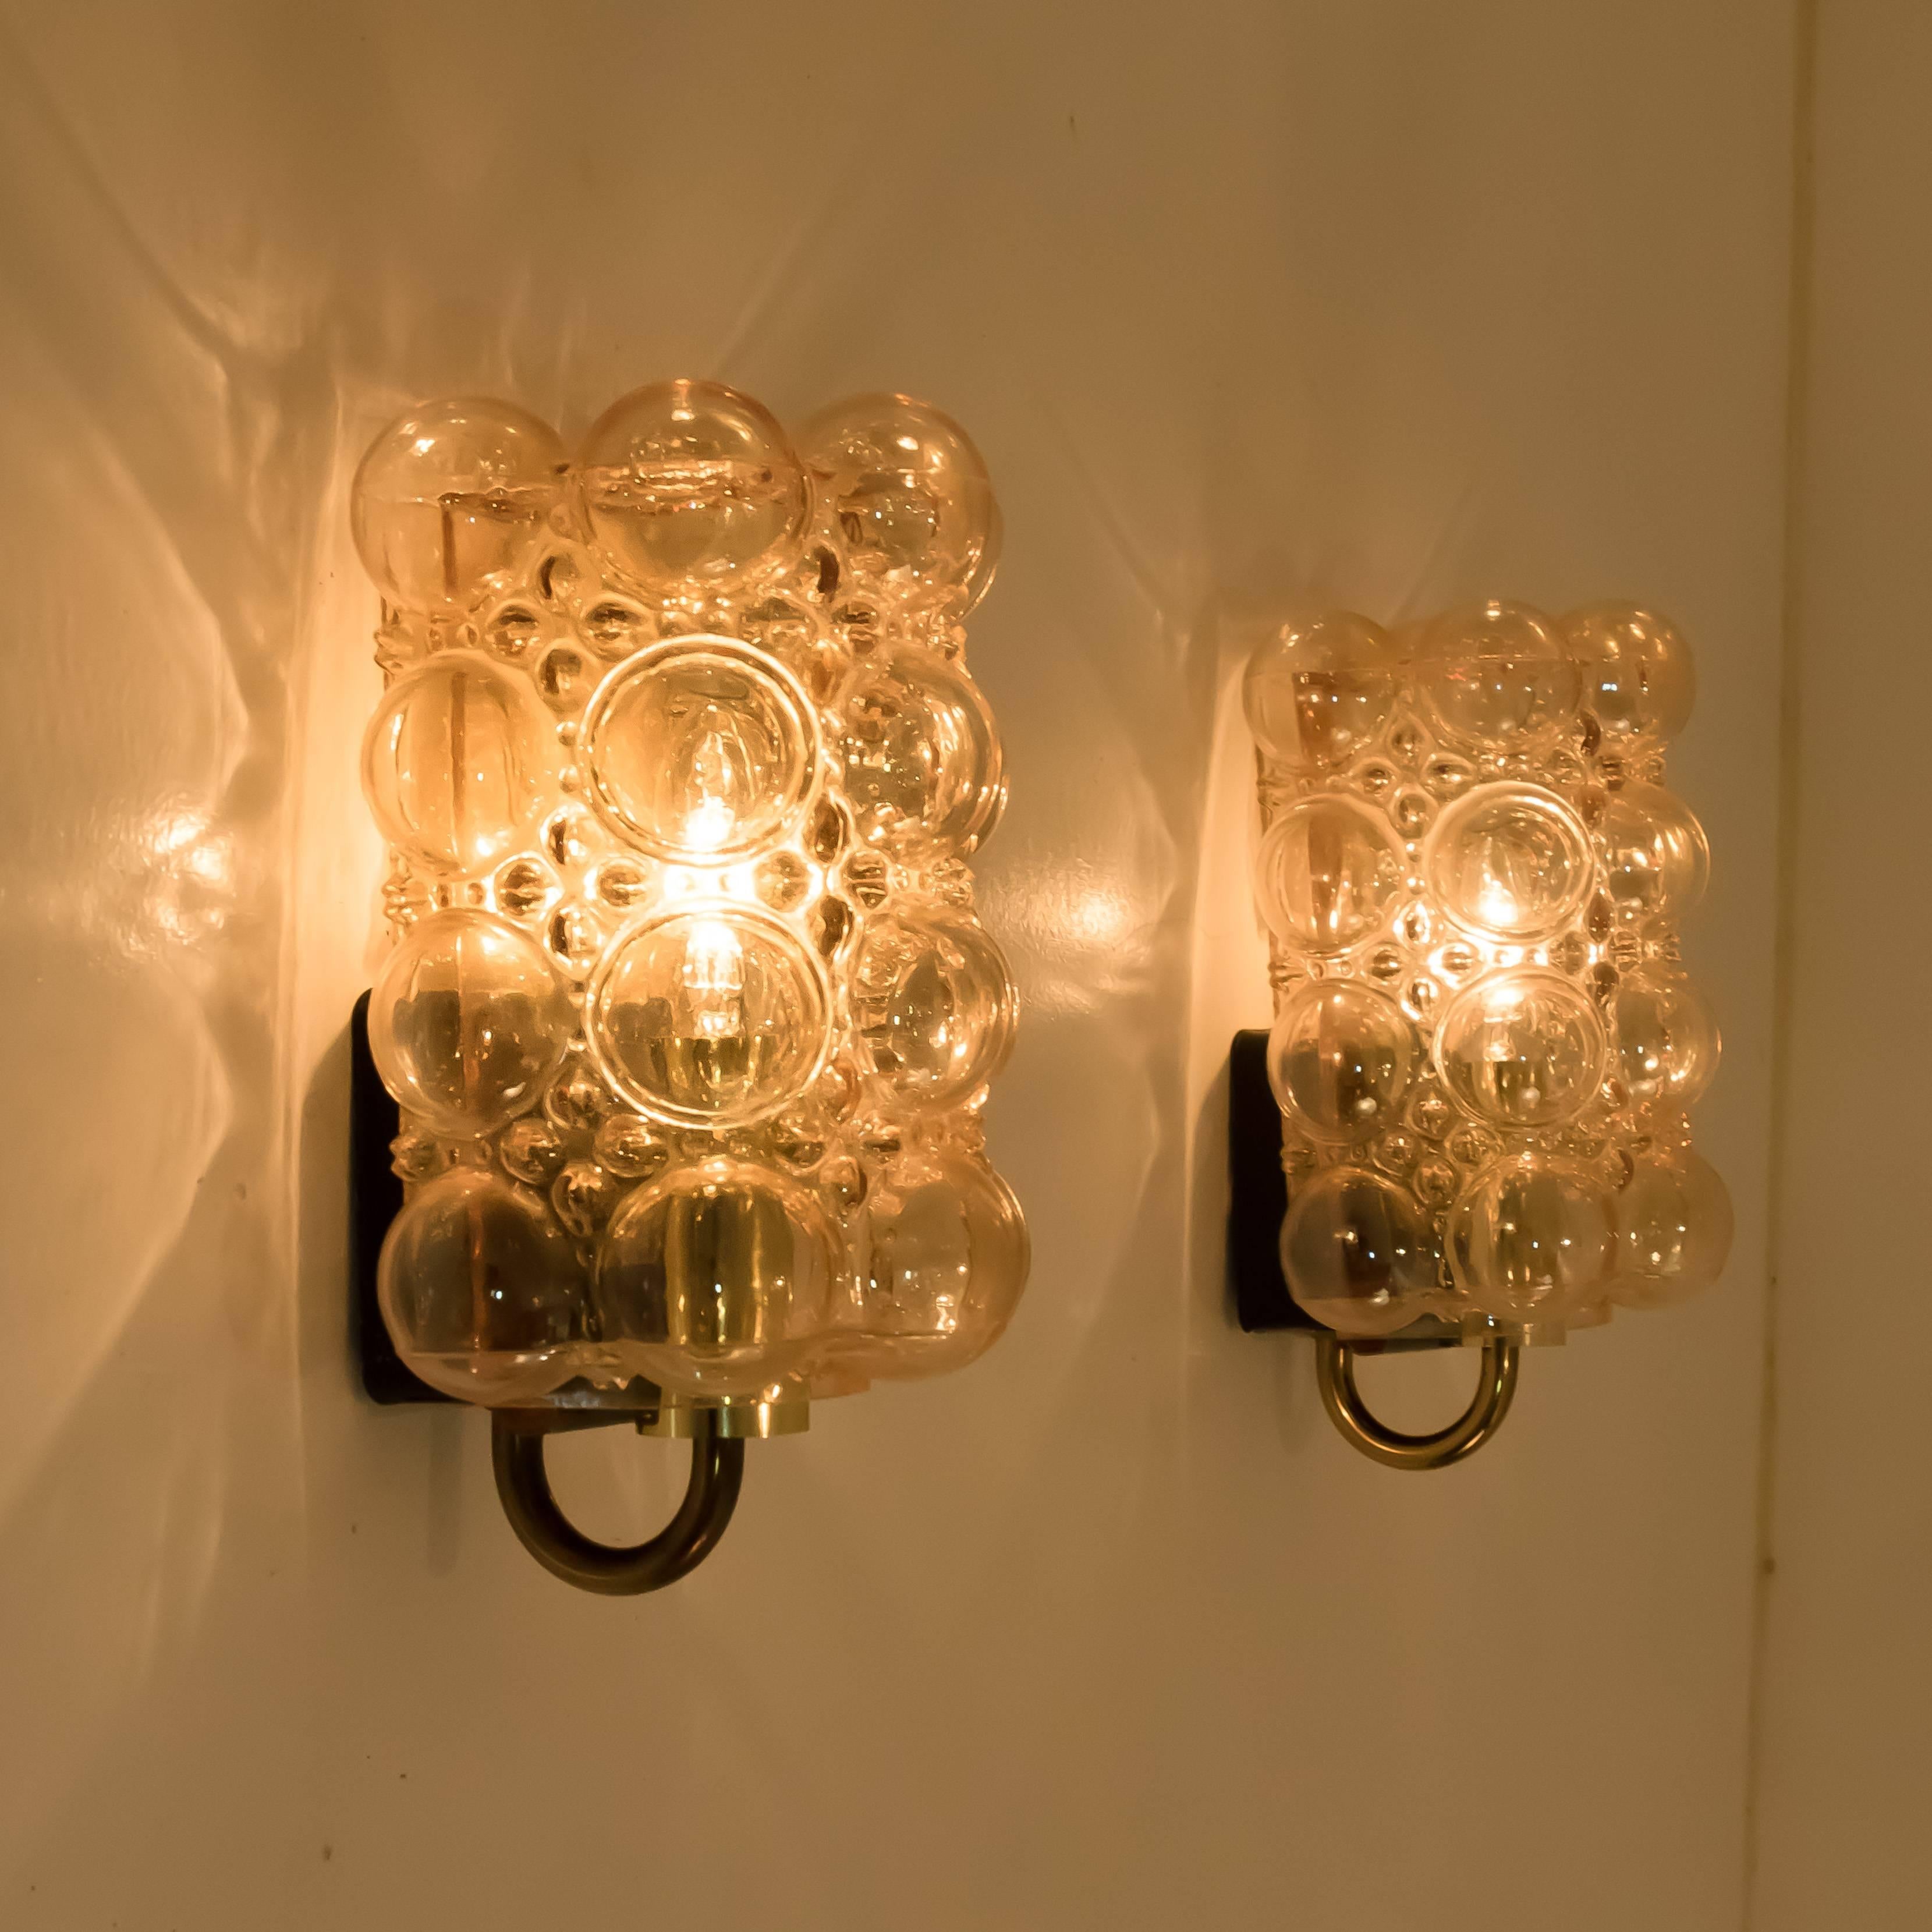 A rare and stunning set of beautiful bubble glass wall lights designed by Helena Tynell for Glashütte Limburg. A design classic, the amber colored or toned of the handblown glass gives a wonderful and warm glow. 

Helena Tynell is a finnish glass